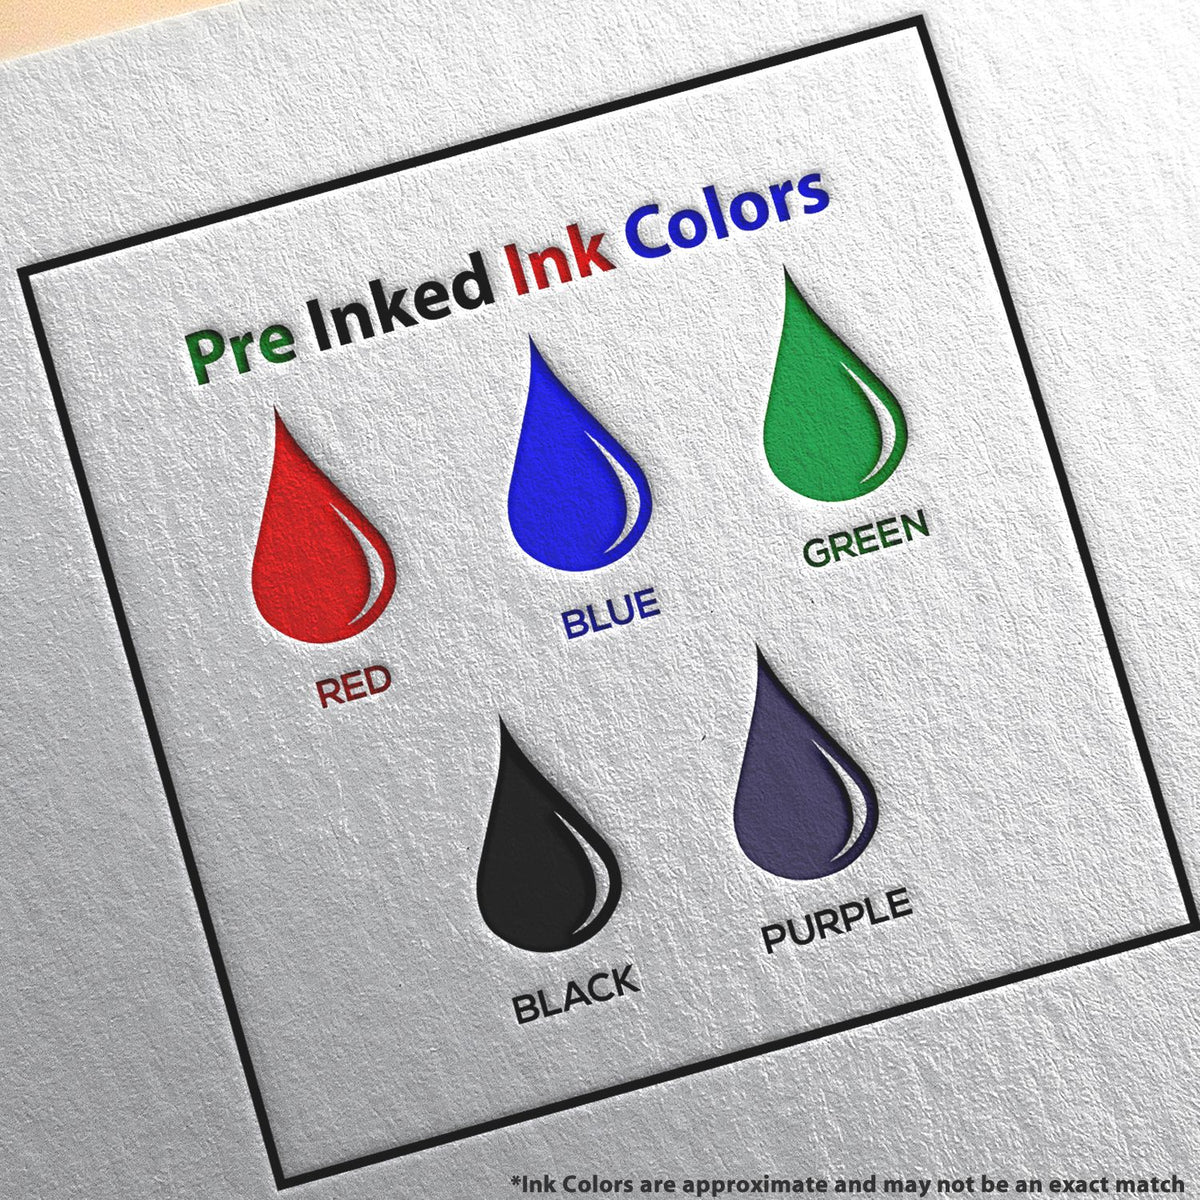 A picture showing the different ink colors or hues available for the Premium MaxLight Pre-Inked New York Landscape Architectural Stamp product.